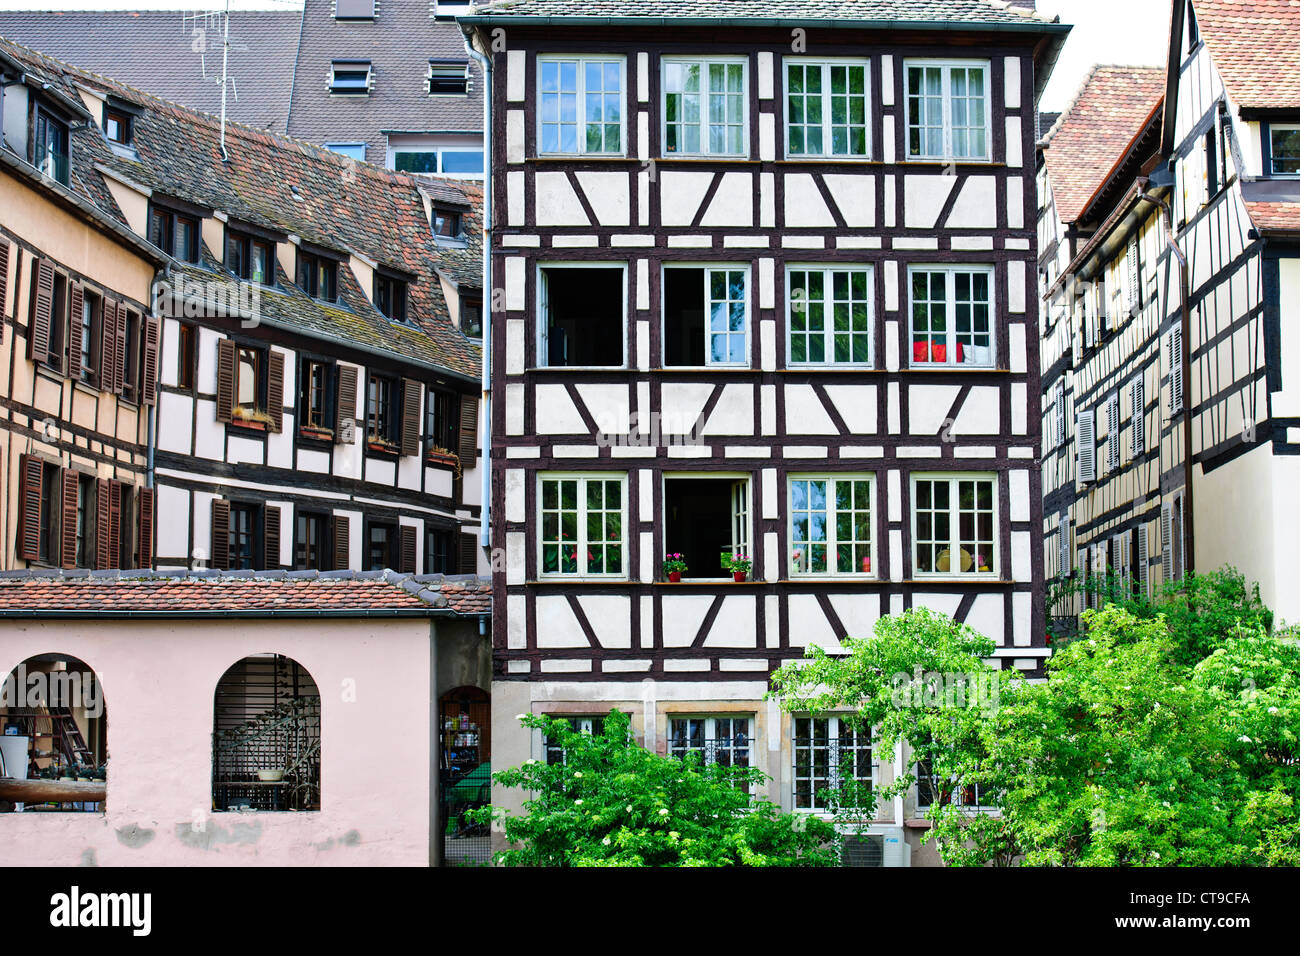 Many timbered and half-timbered houses in the area,some dating from mediaeval times,L'ILL River,Petit France,Strasbourg,France Stock Photo